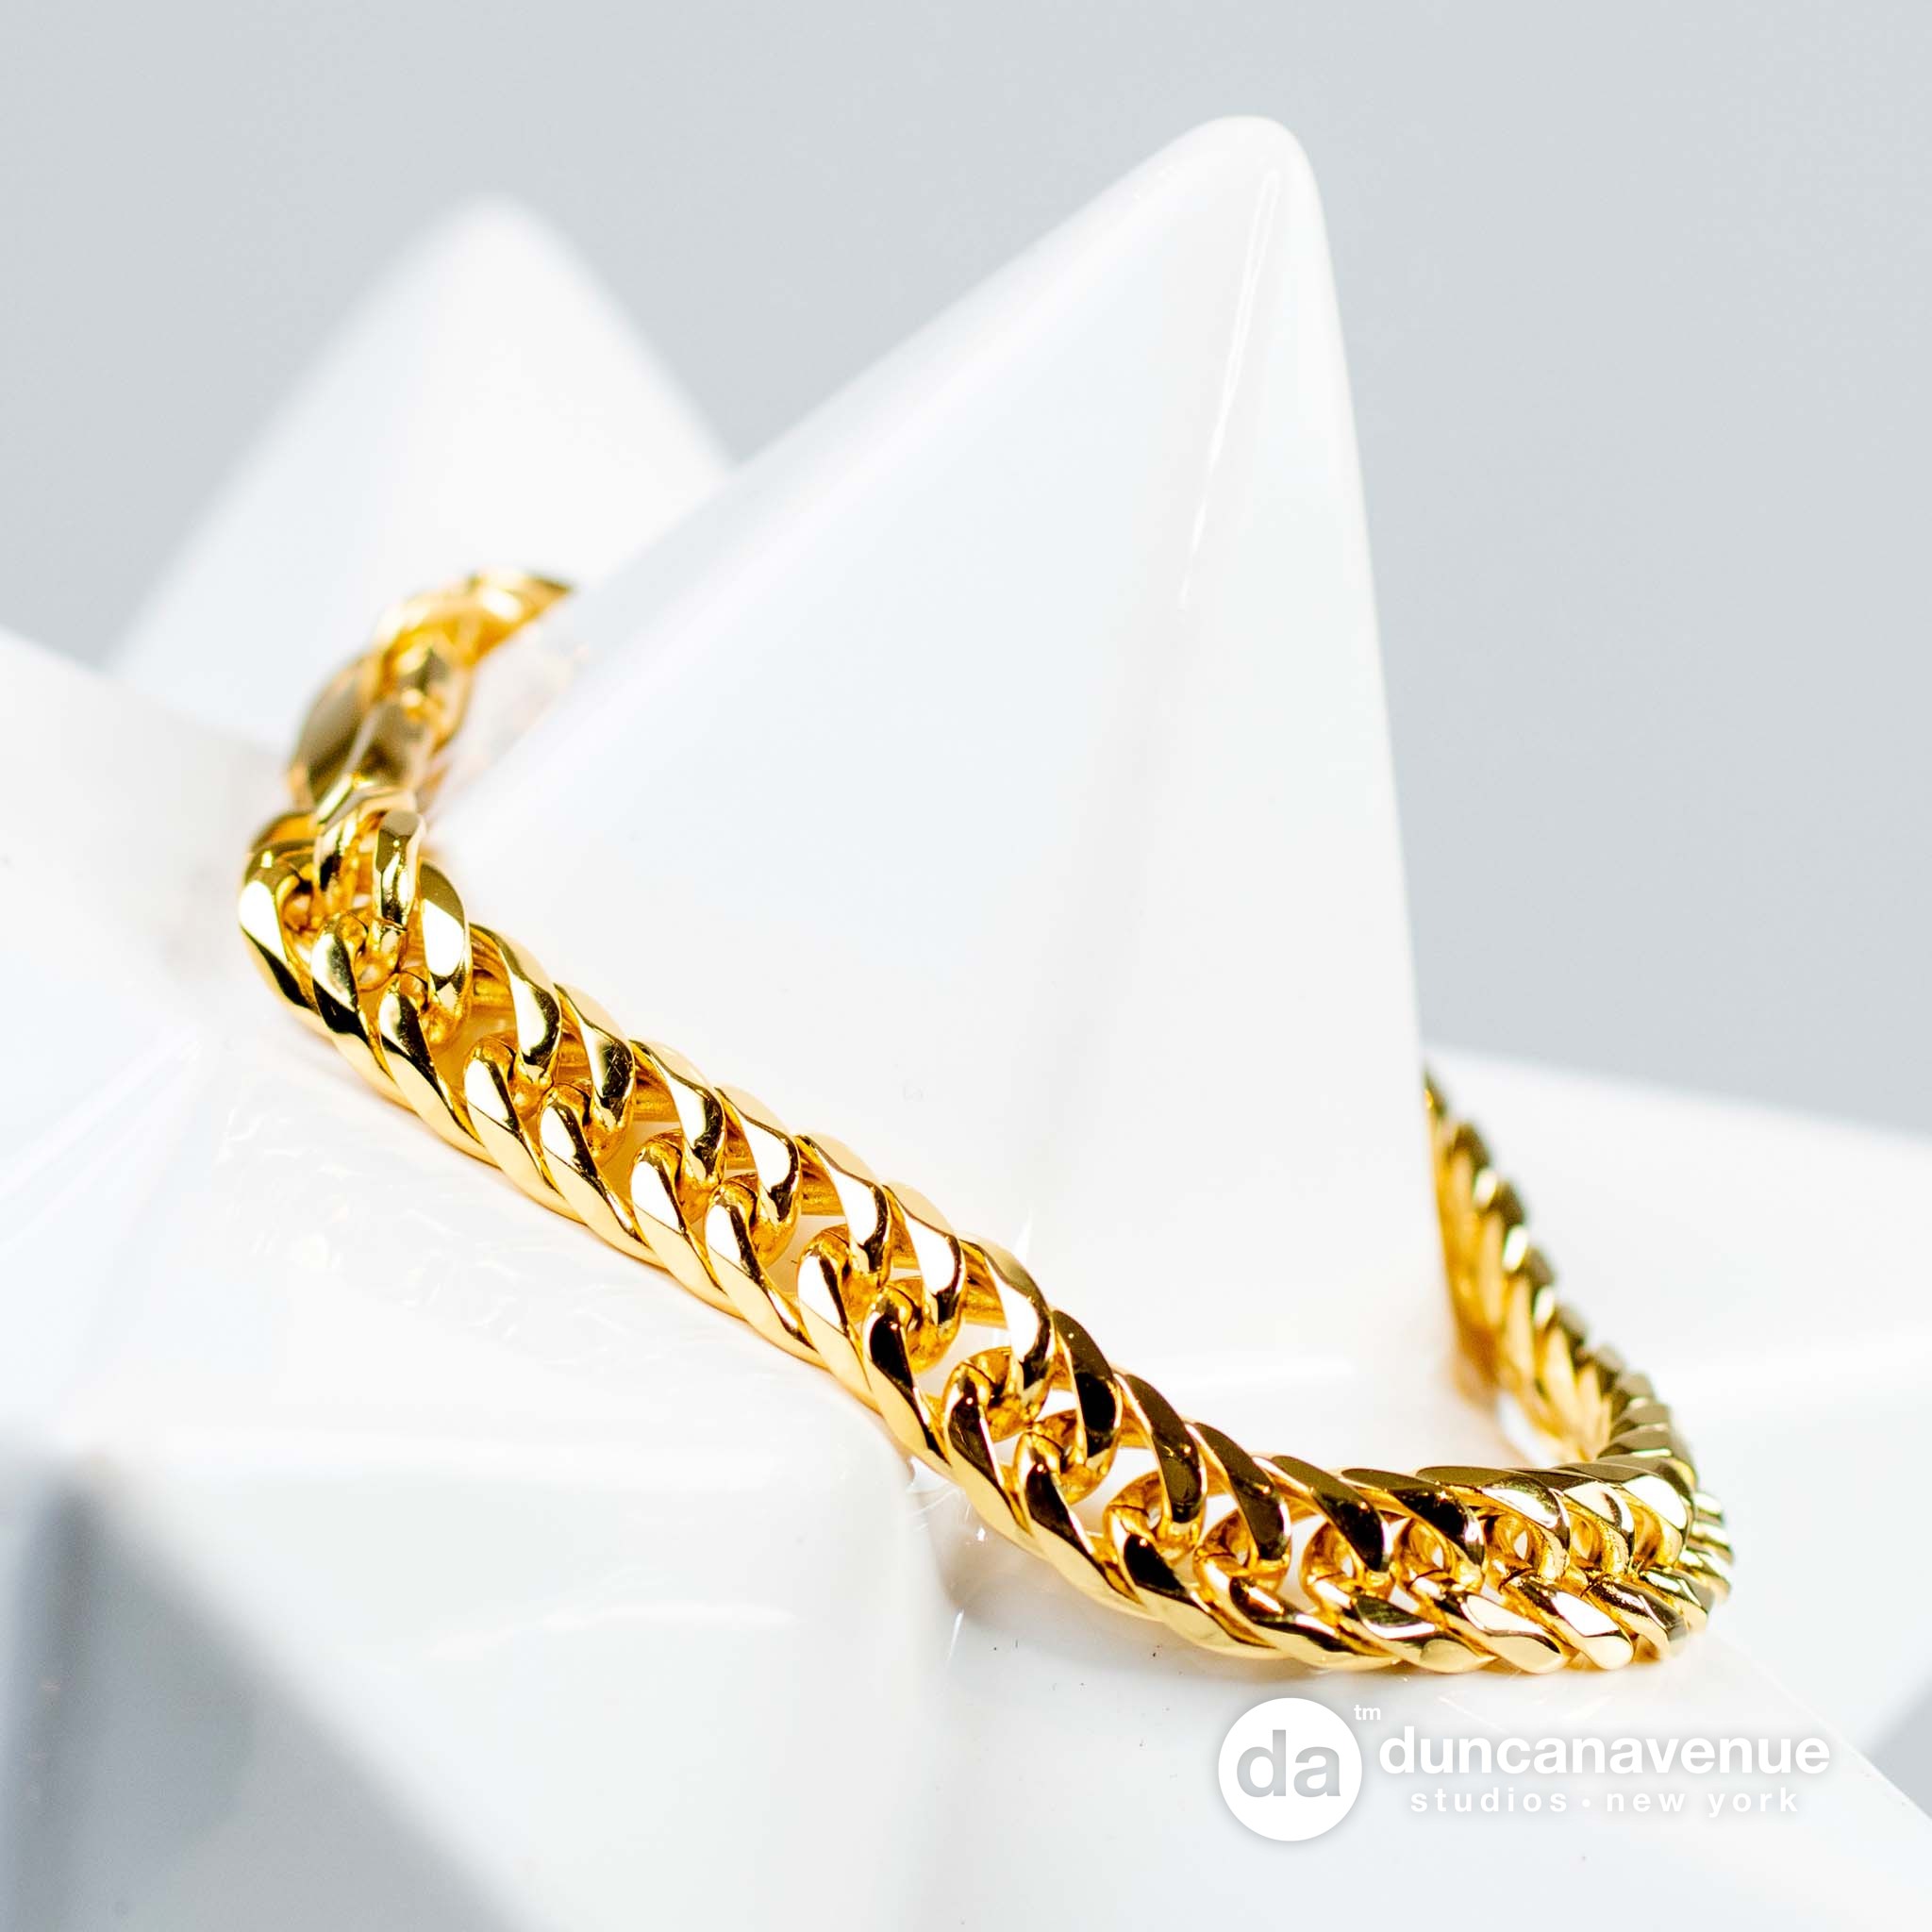 Product Photography – Jewelry – Duncan Avenue Studios – New York